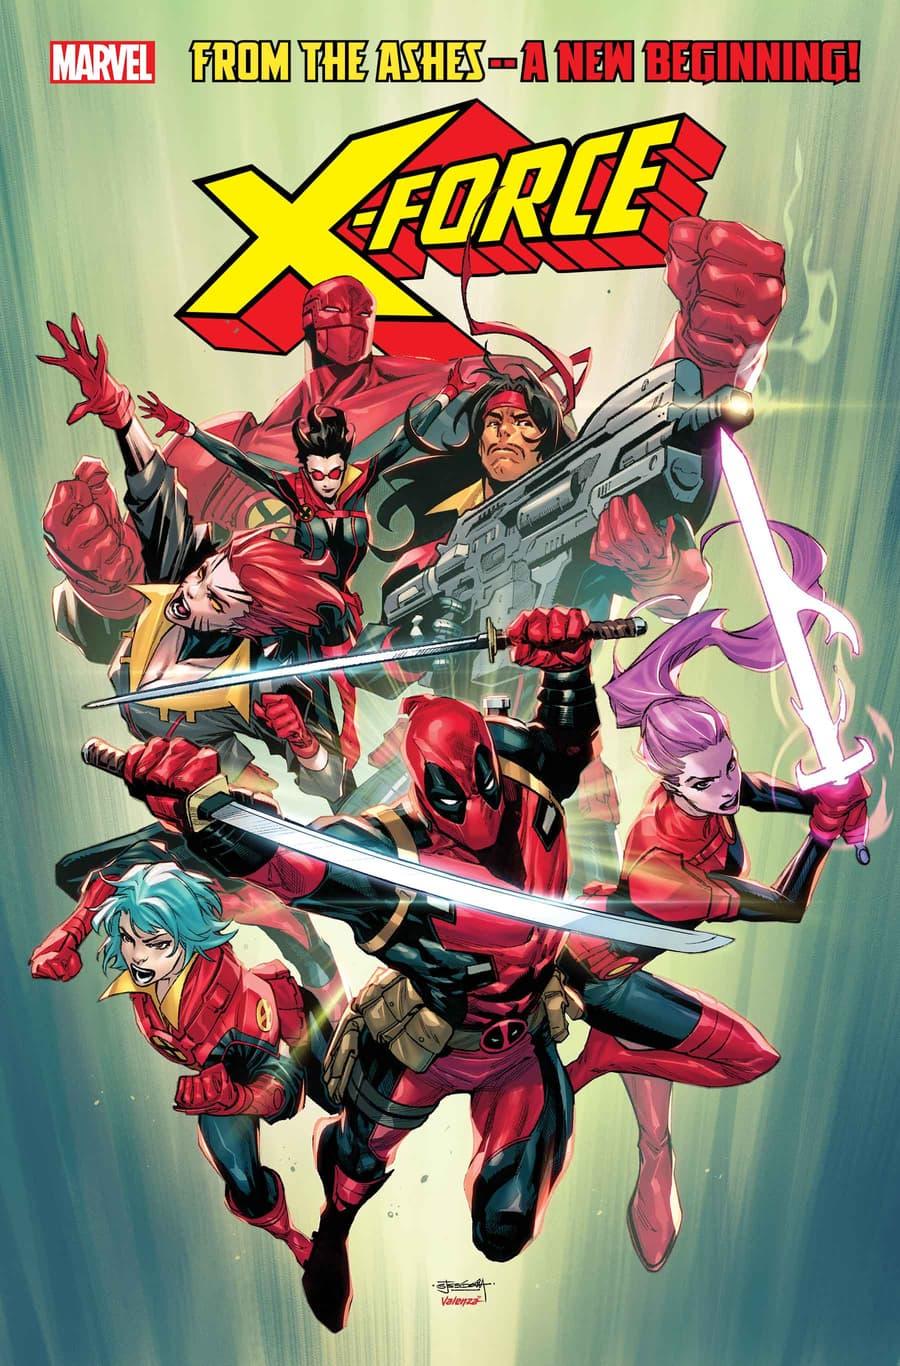 Marvel Announces X-Force Relaunch With Deadpool